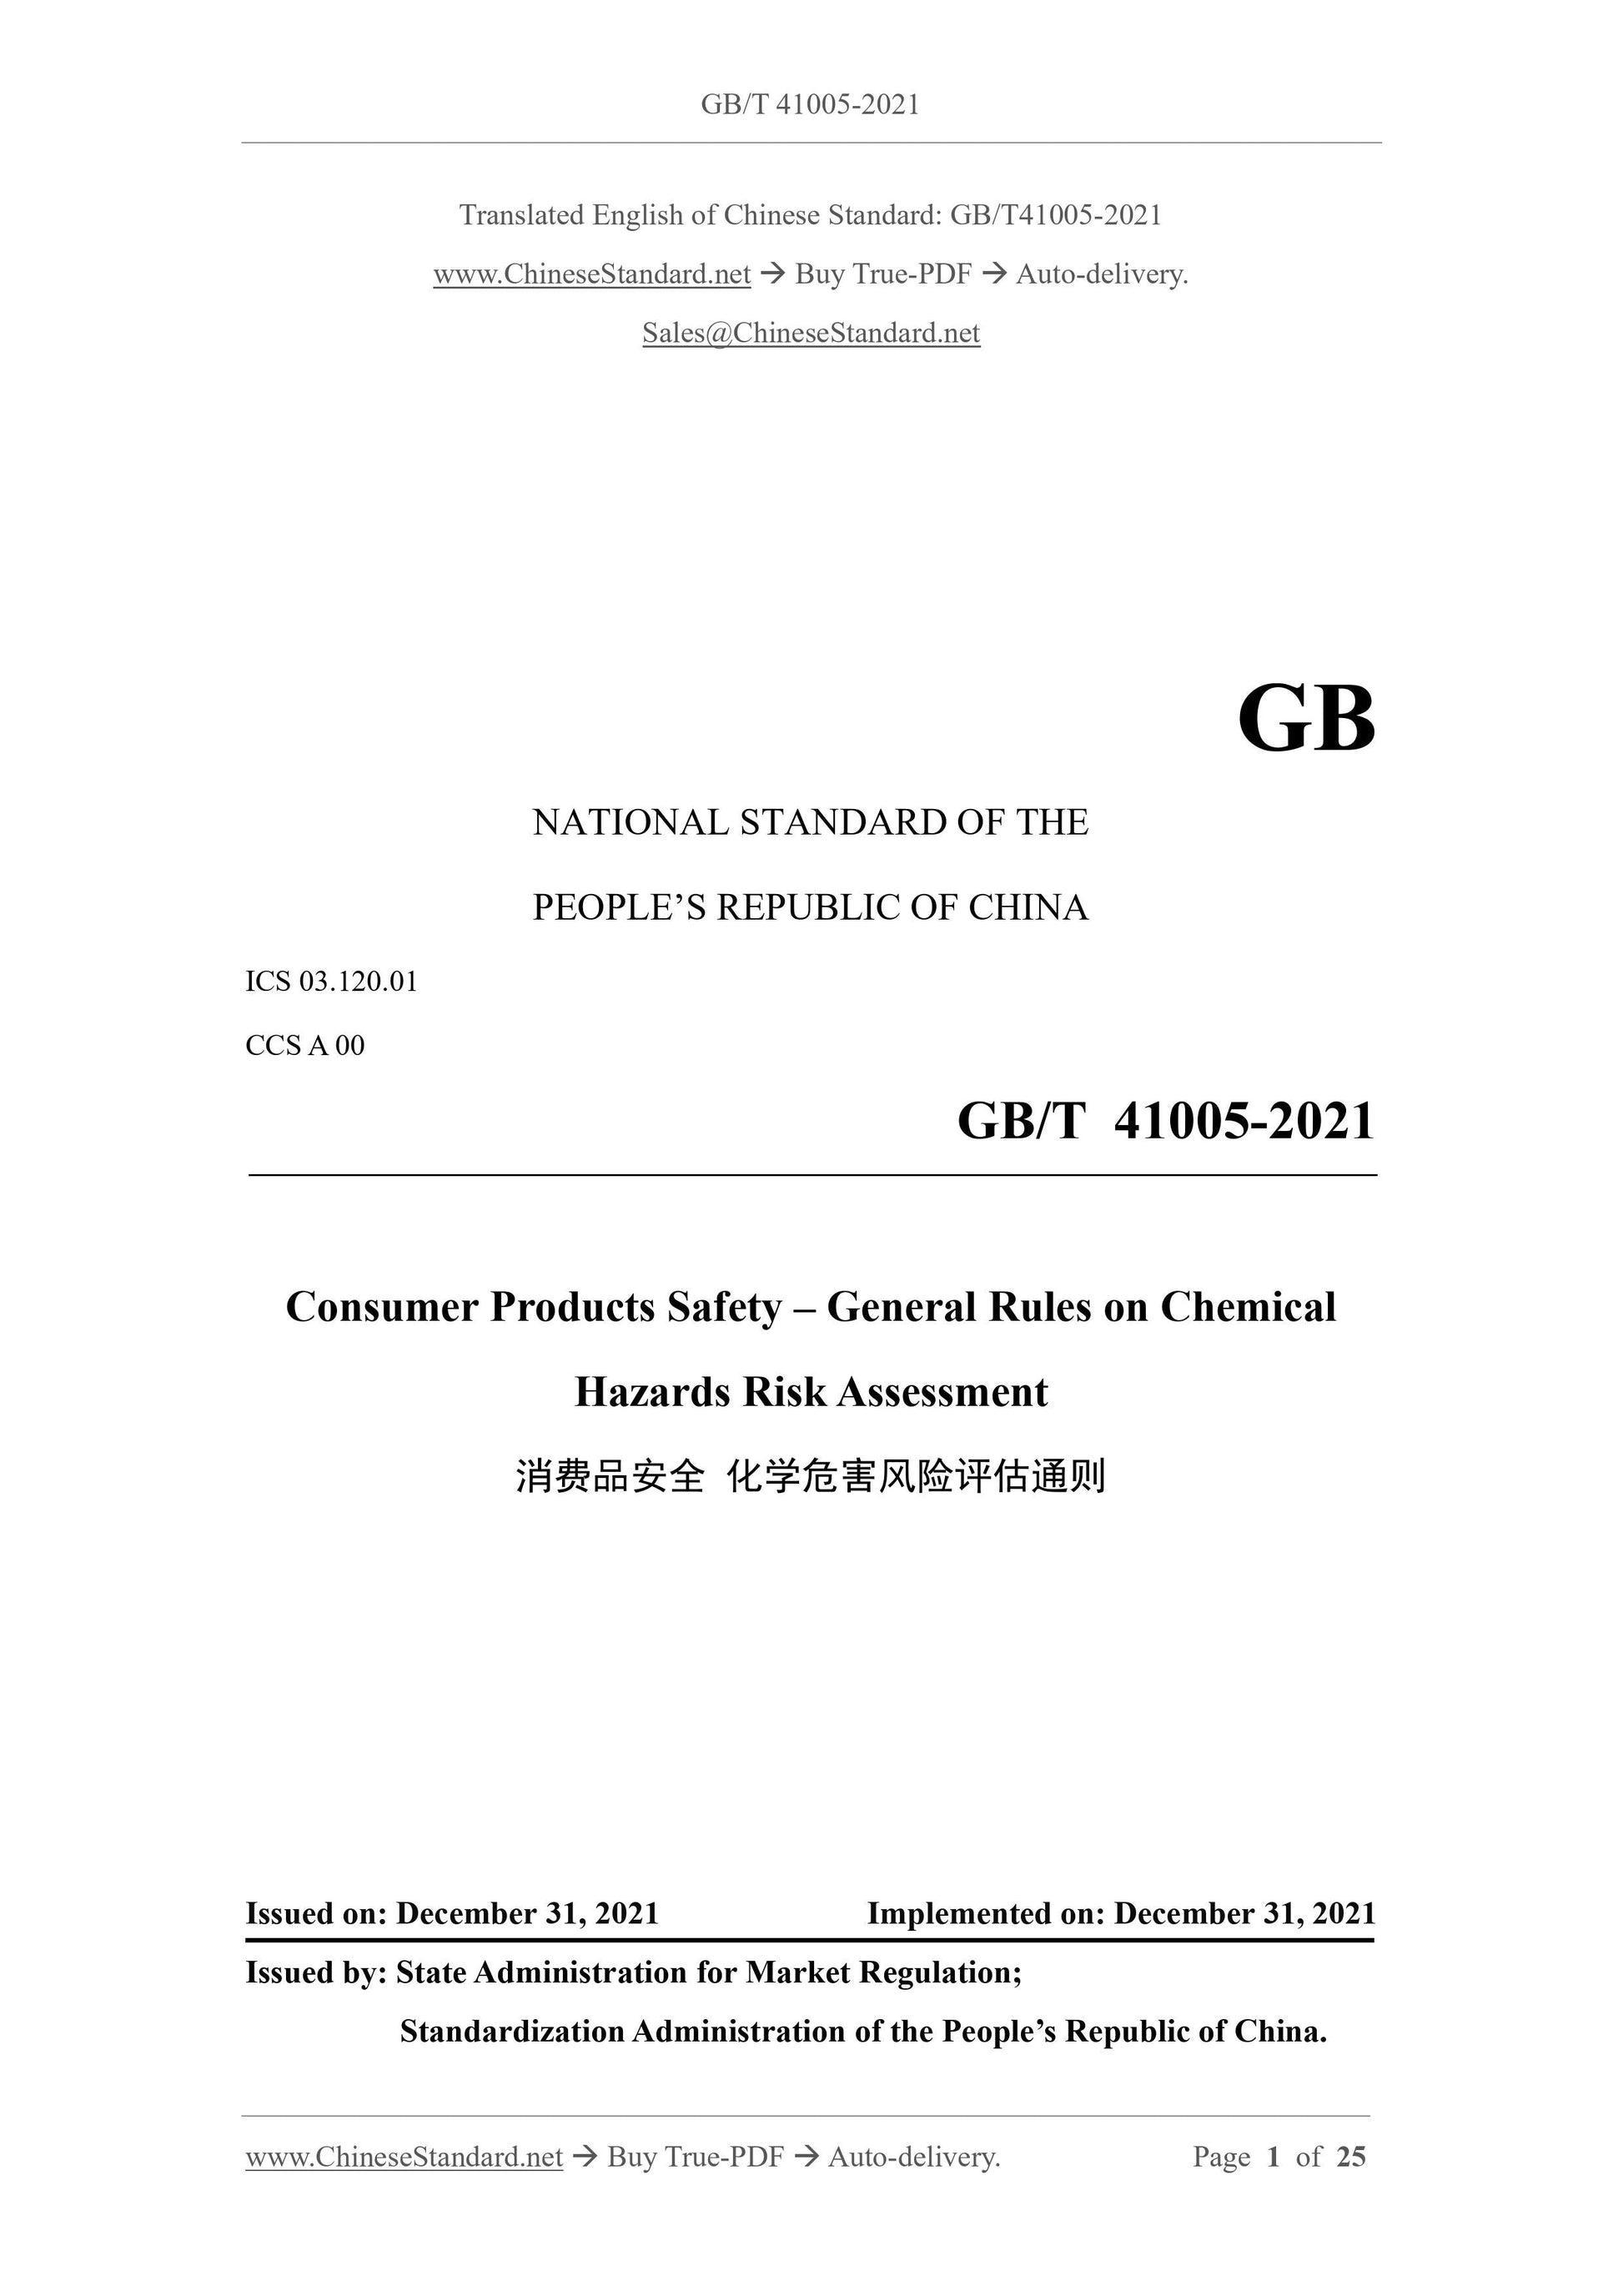 GB/T 41005-2021 Page 1